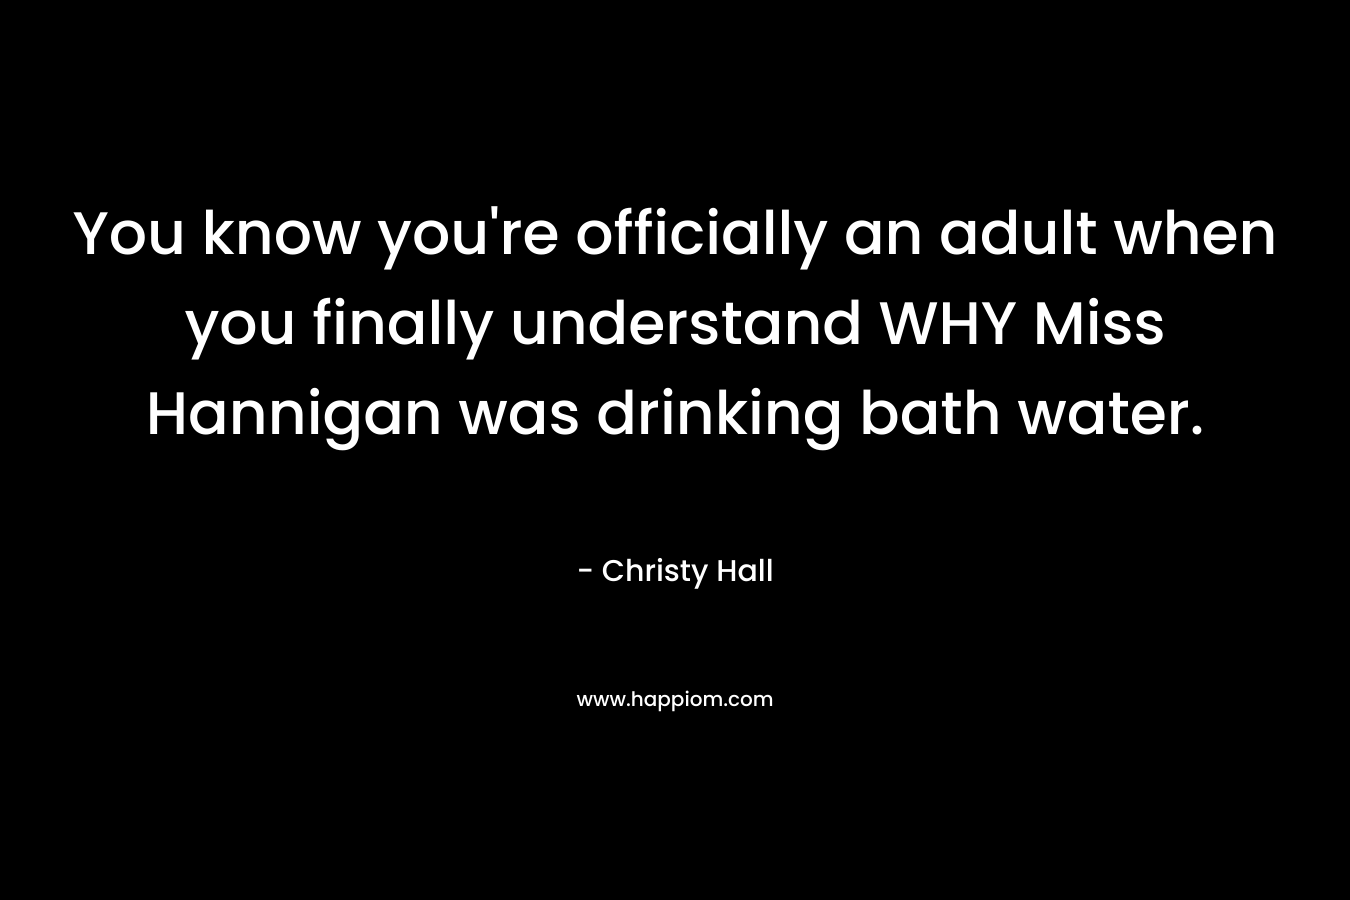 You know you're officially an adult when you finally understand WHY Miss Hannigan was drinking bath water.